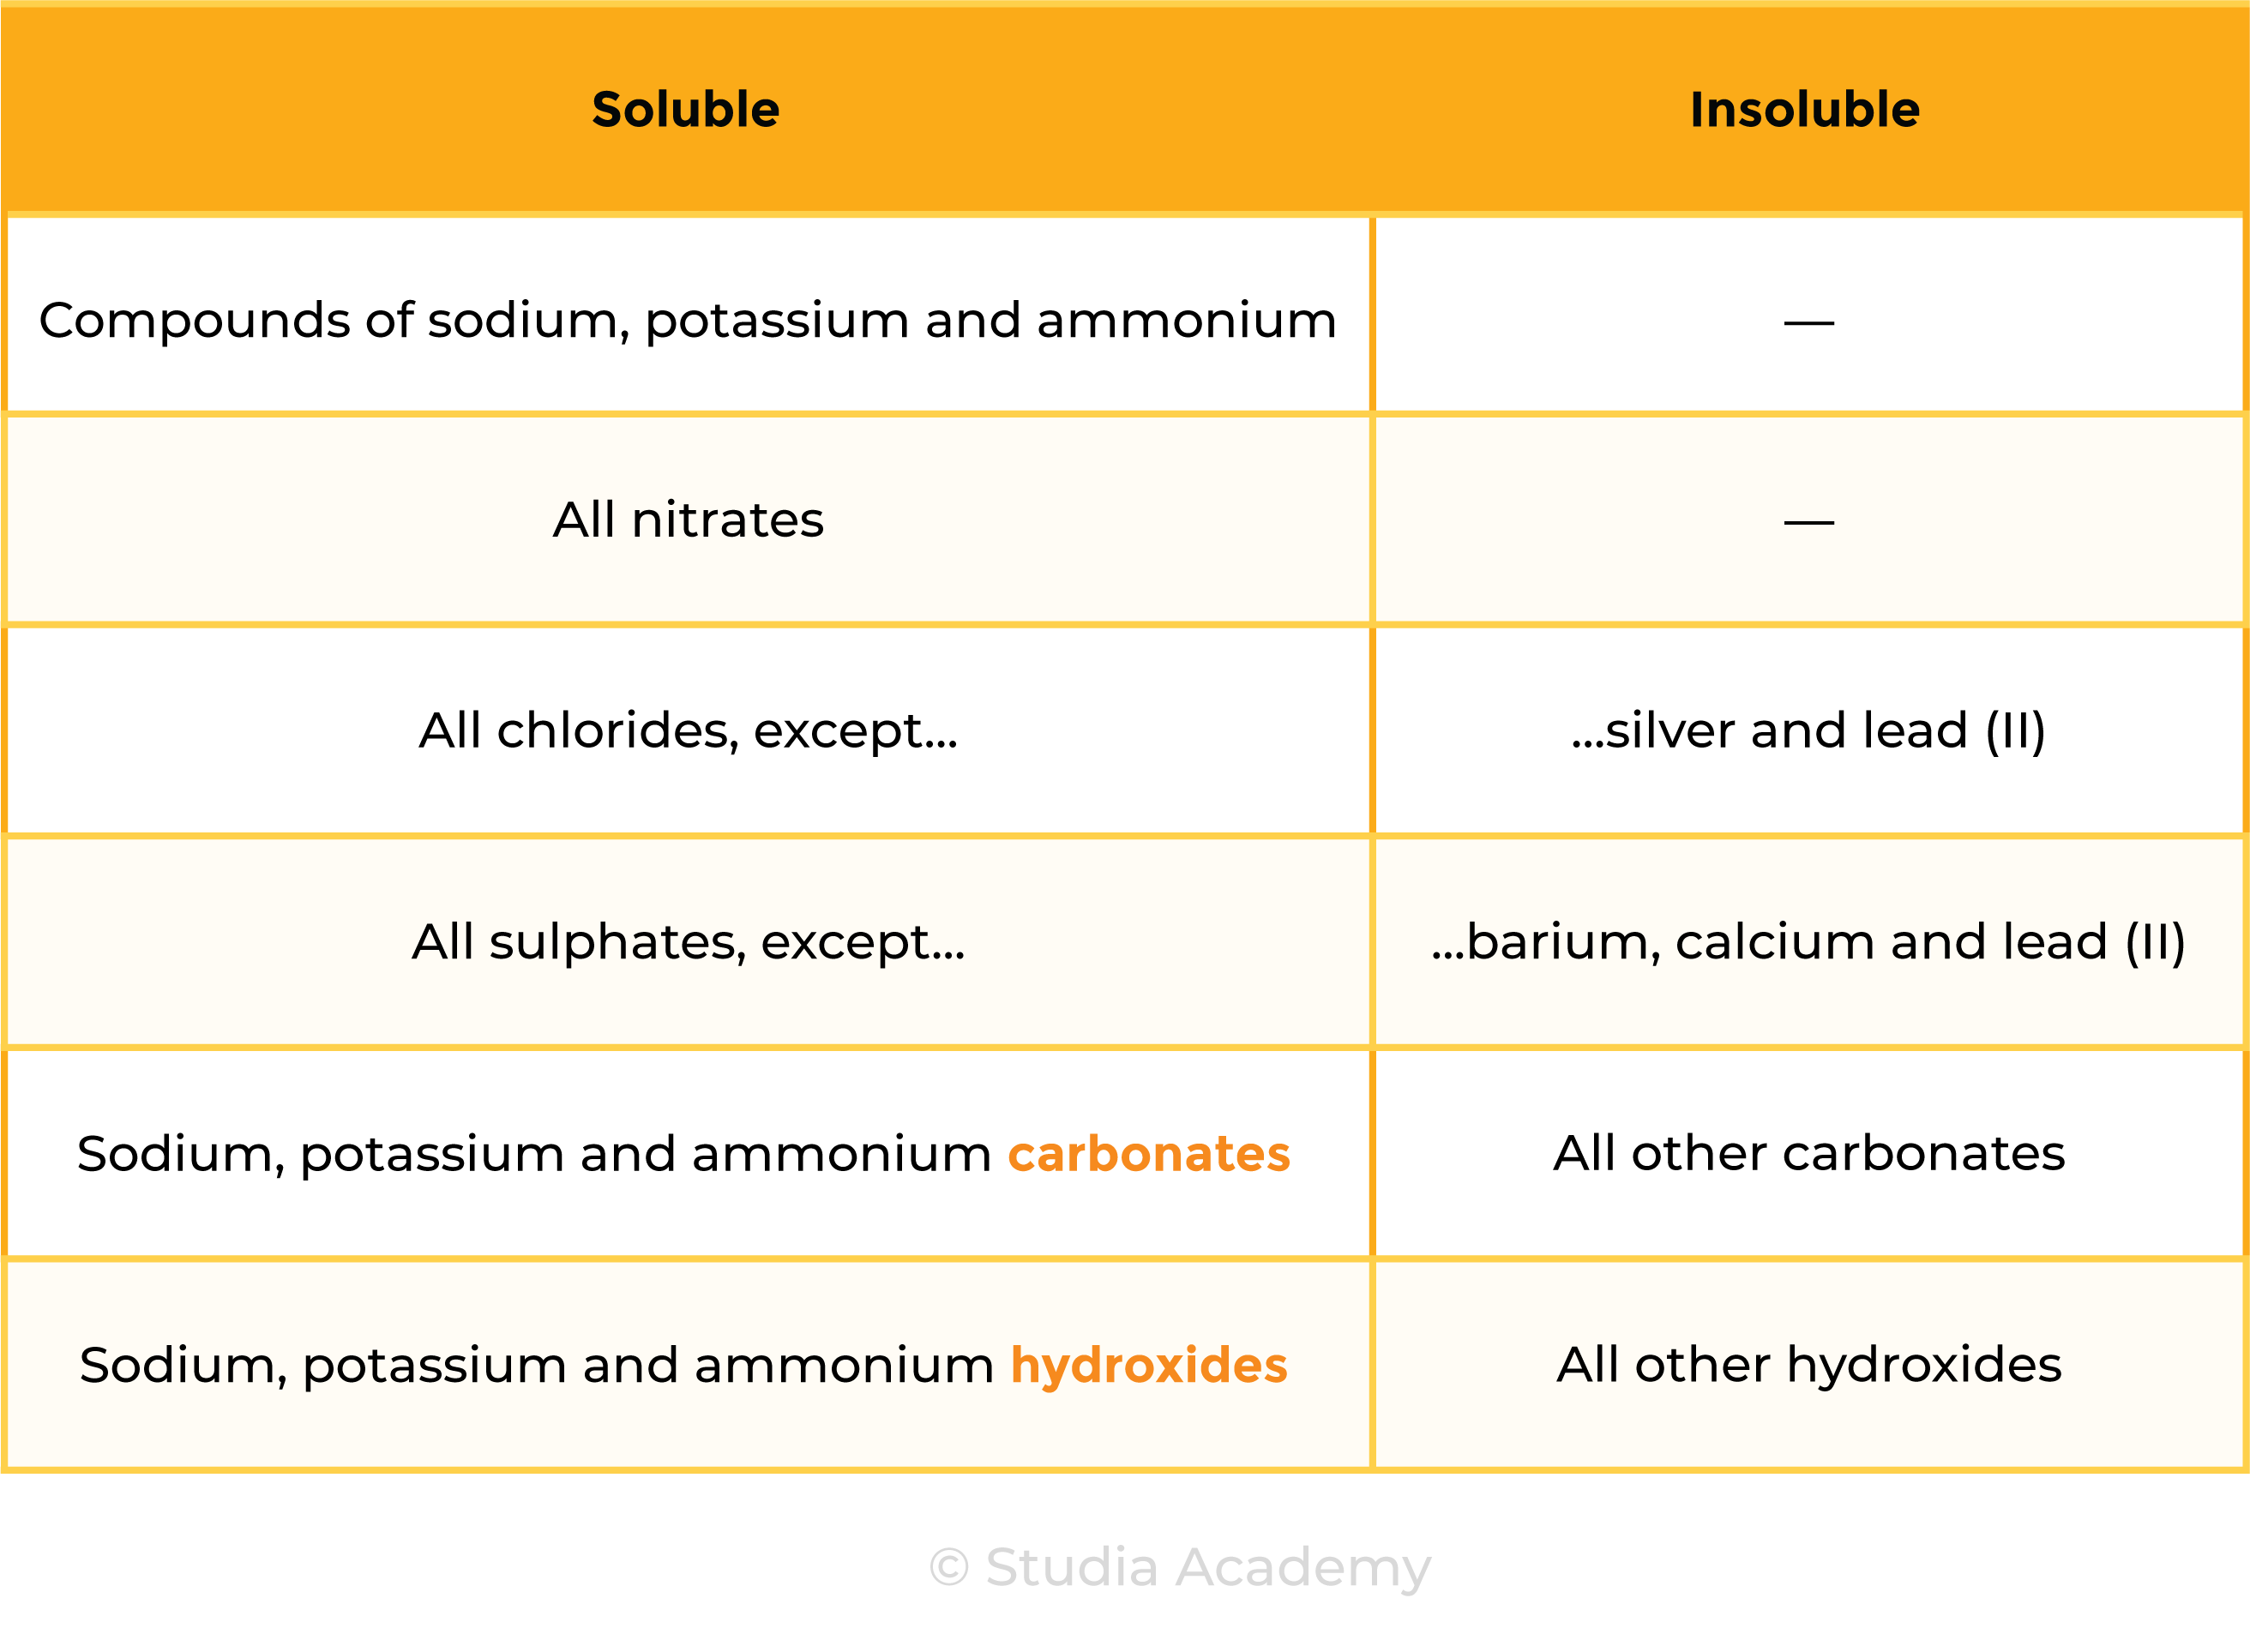 edexcel_igcse_chemistry_topic 16 tables_acids, bases, and salt preparations_001_solubility rules